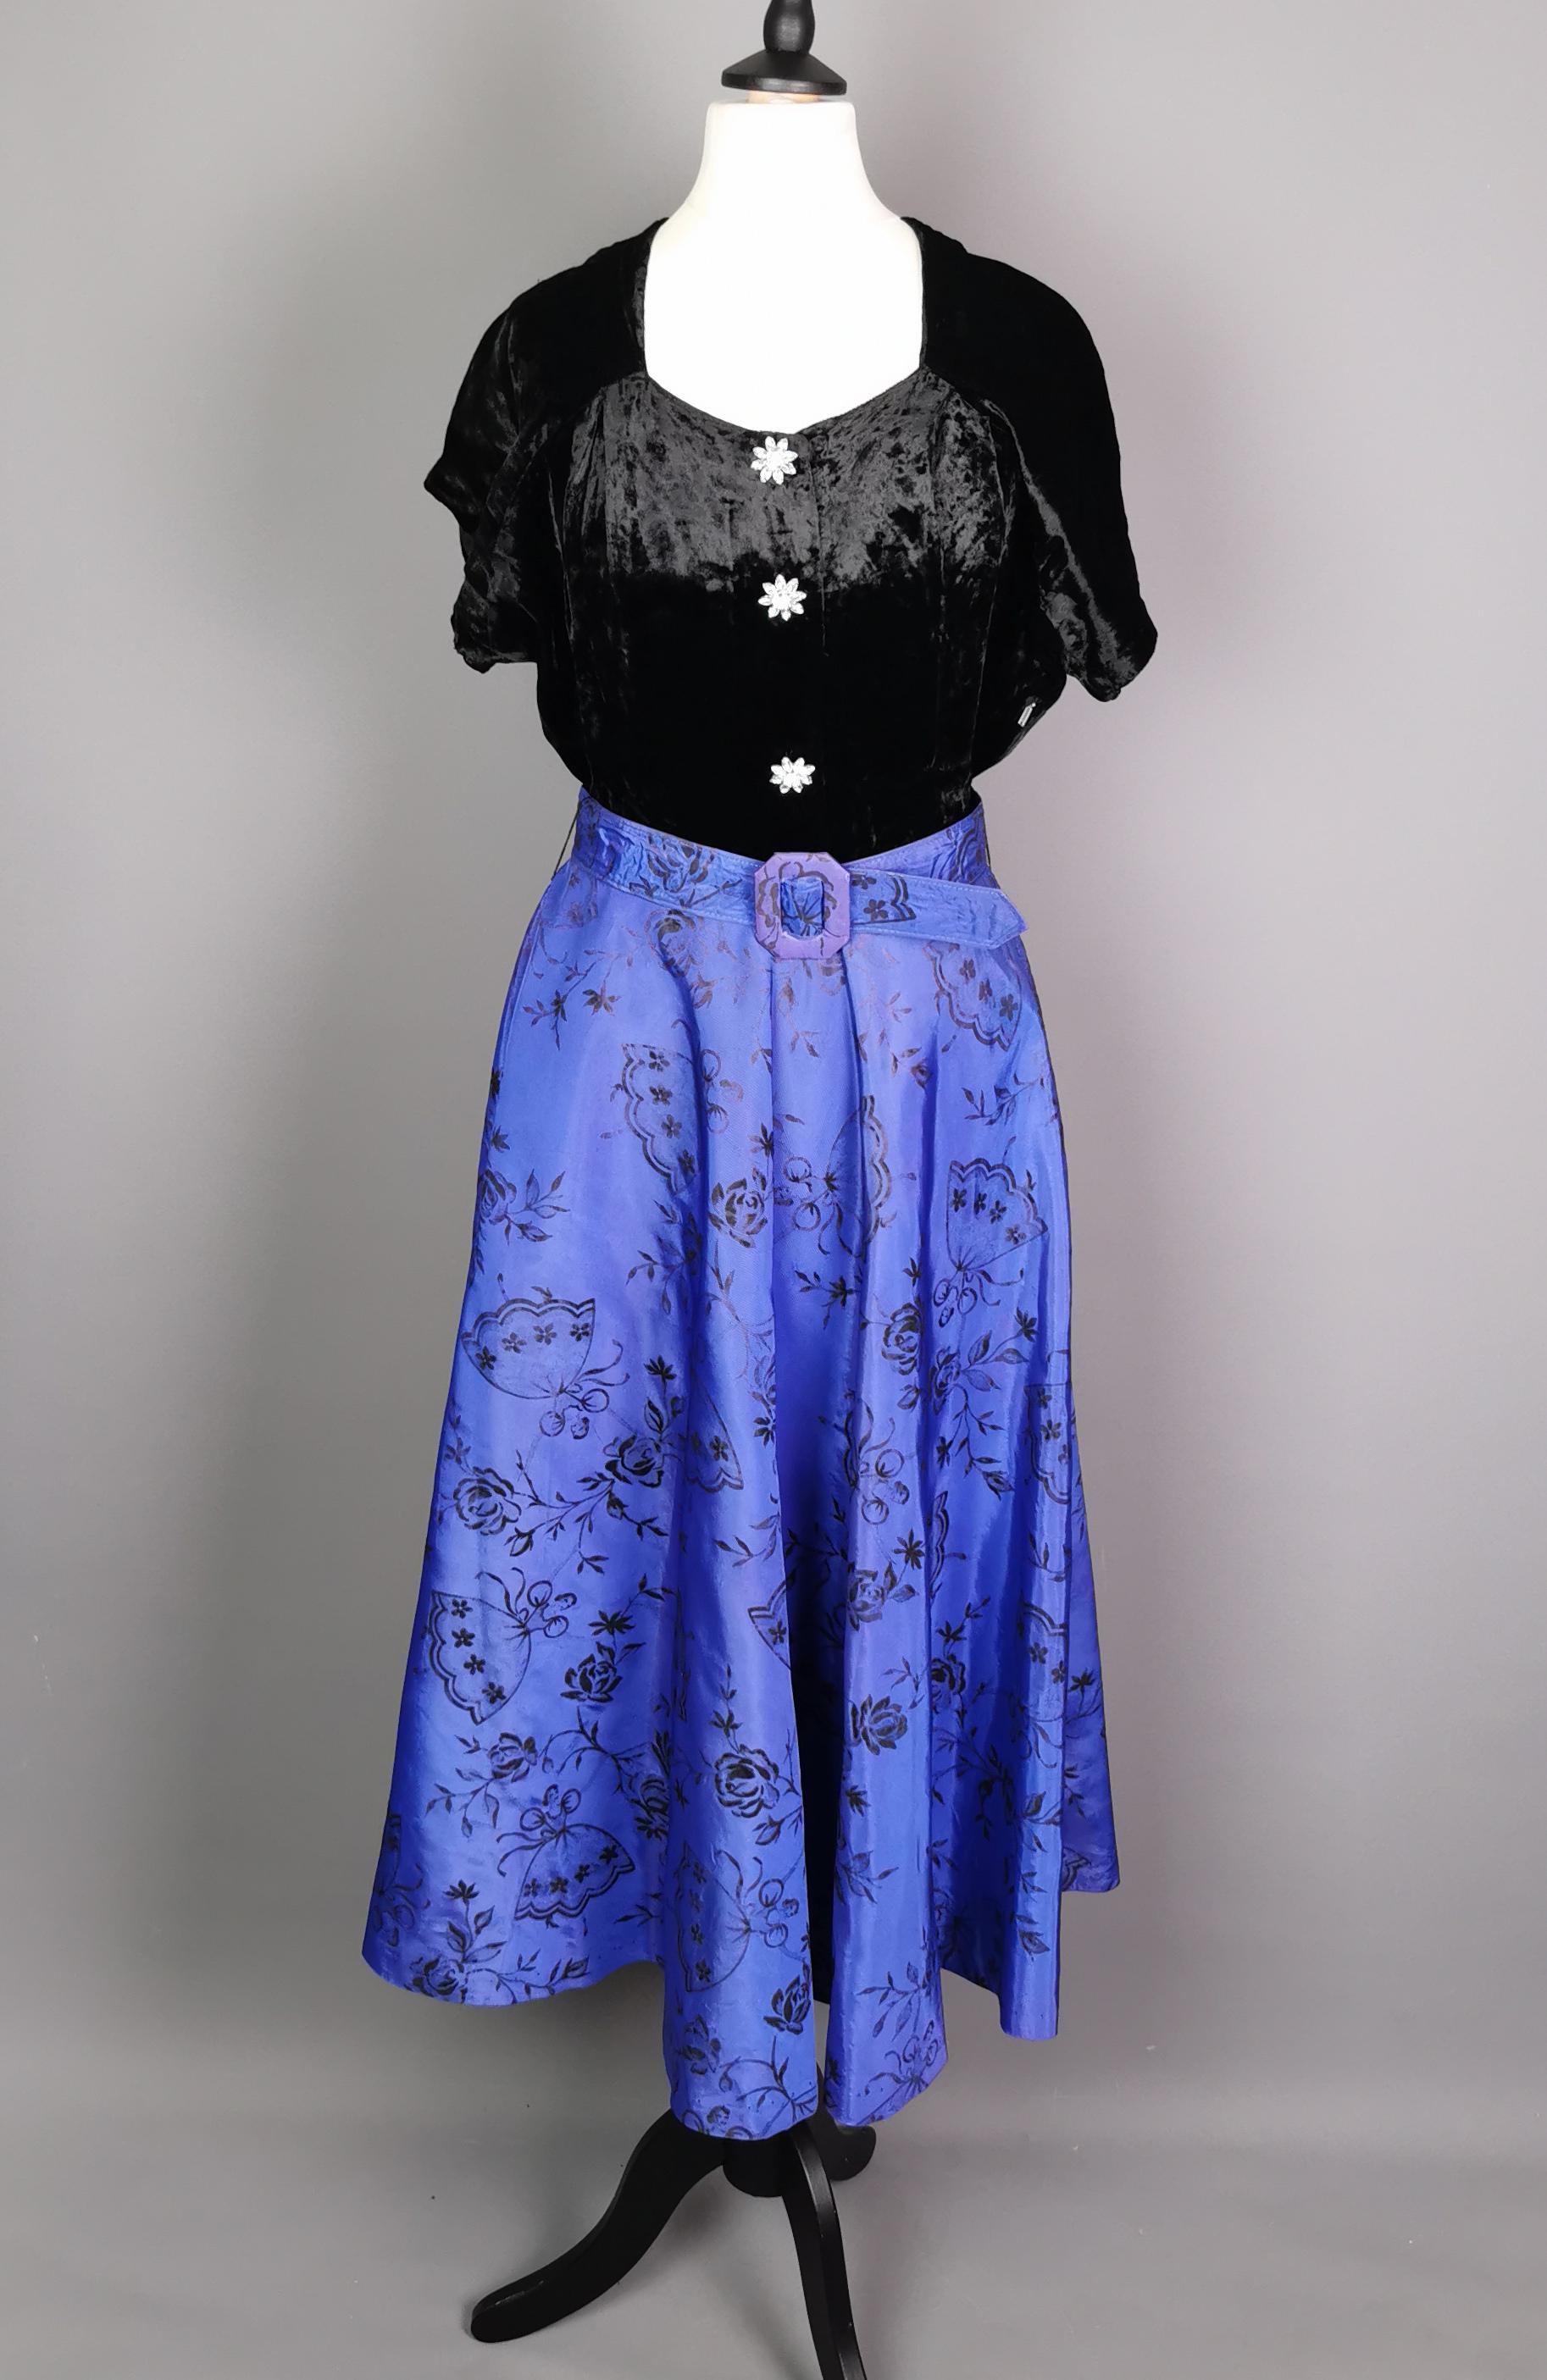 A superb, gorgeous vintage late 1940s evening dress.

It has a sumptuous black silk velvet bodice with a soft sweetheart neckline and faux buttons shaped like flowers in a diamante style.

The dress is nipped in at the waist with a full flared skirt